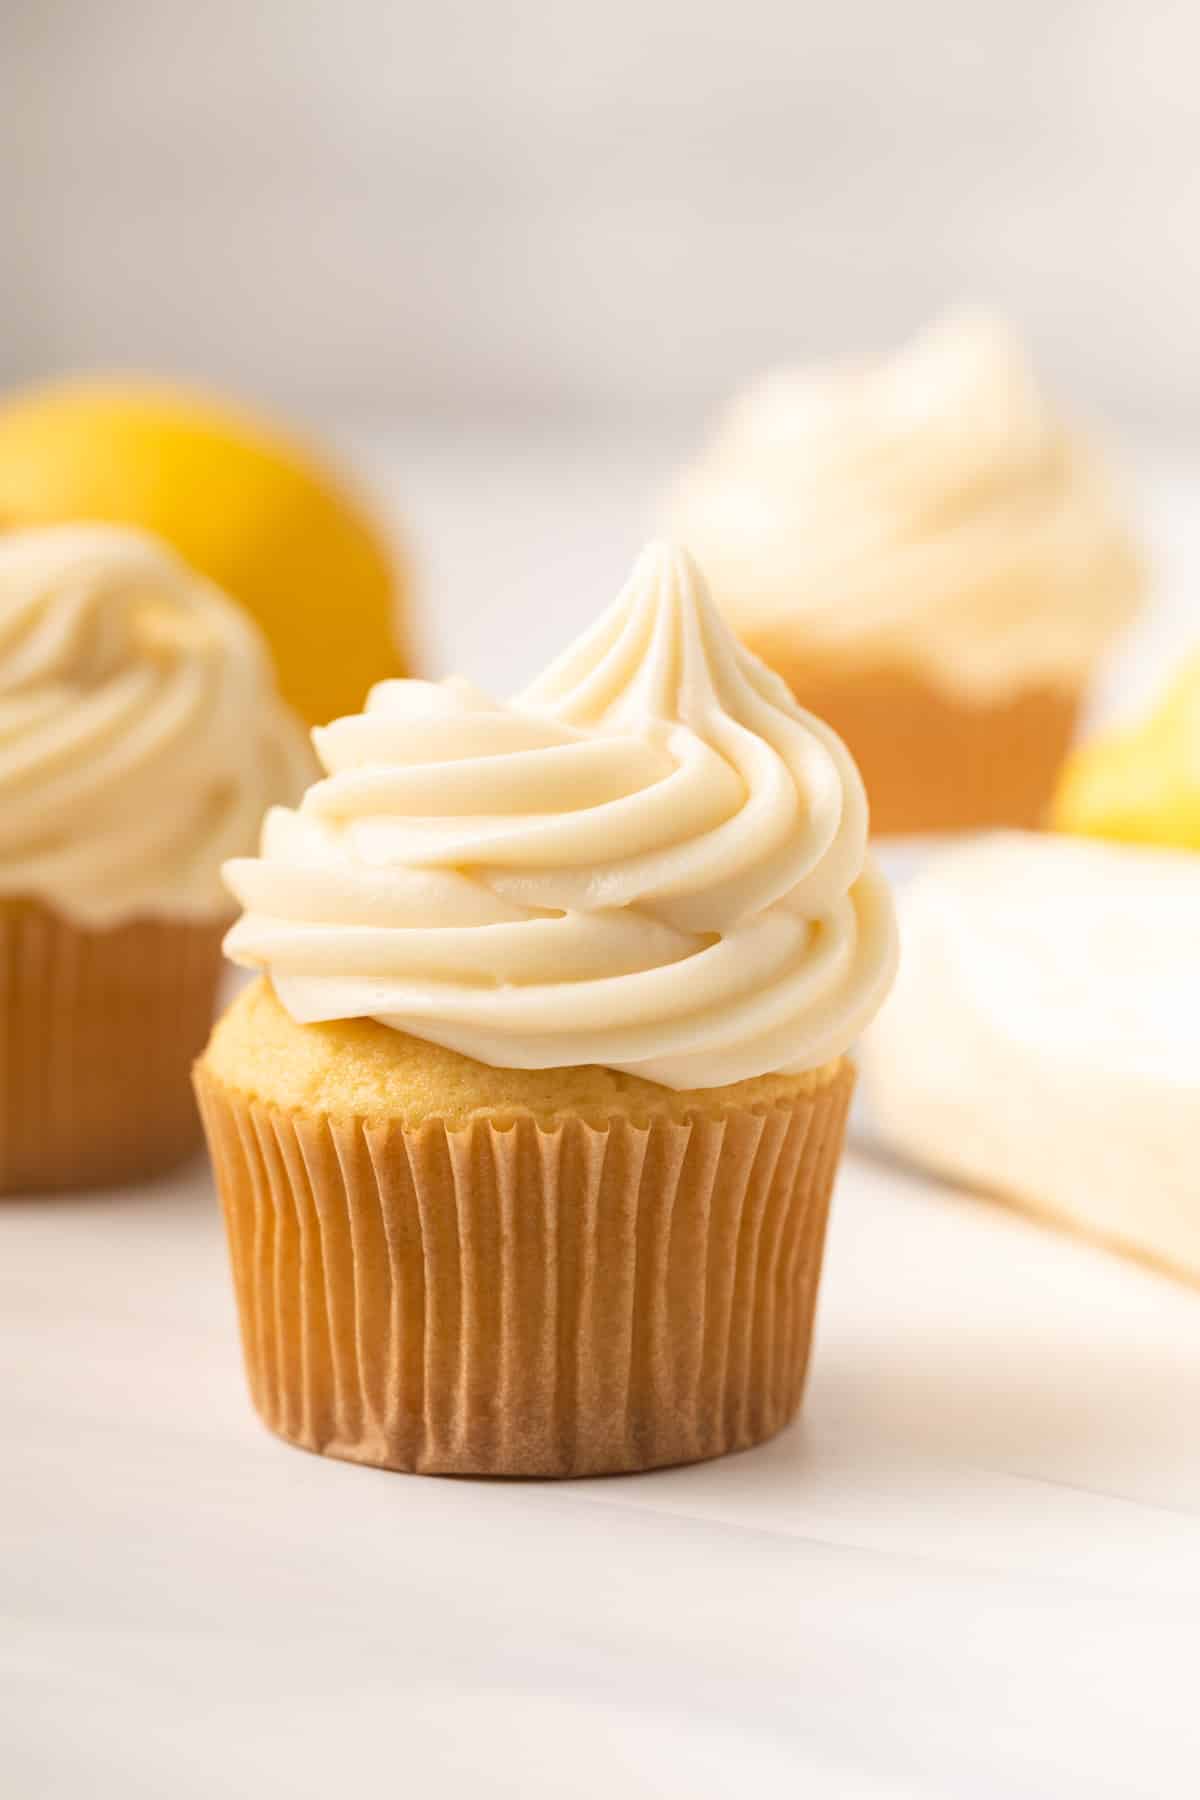 Lemon cream cheese frosting swirled in top of a cupcake.